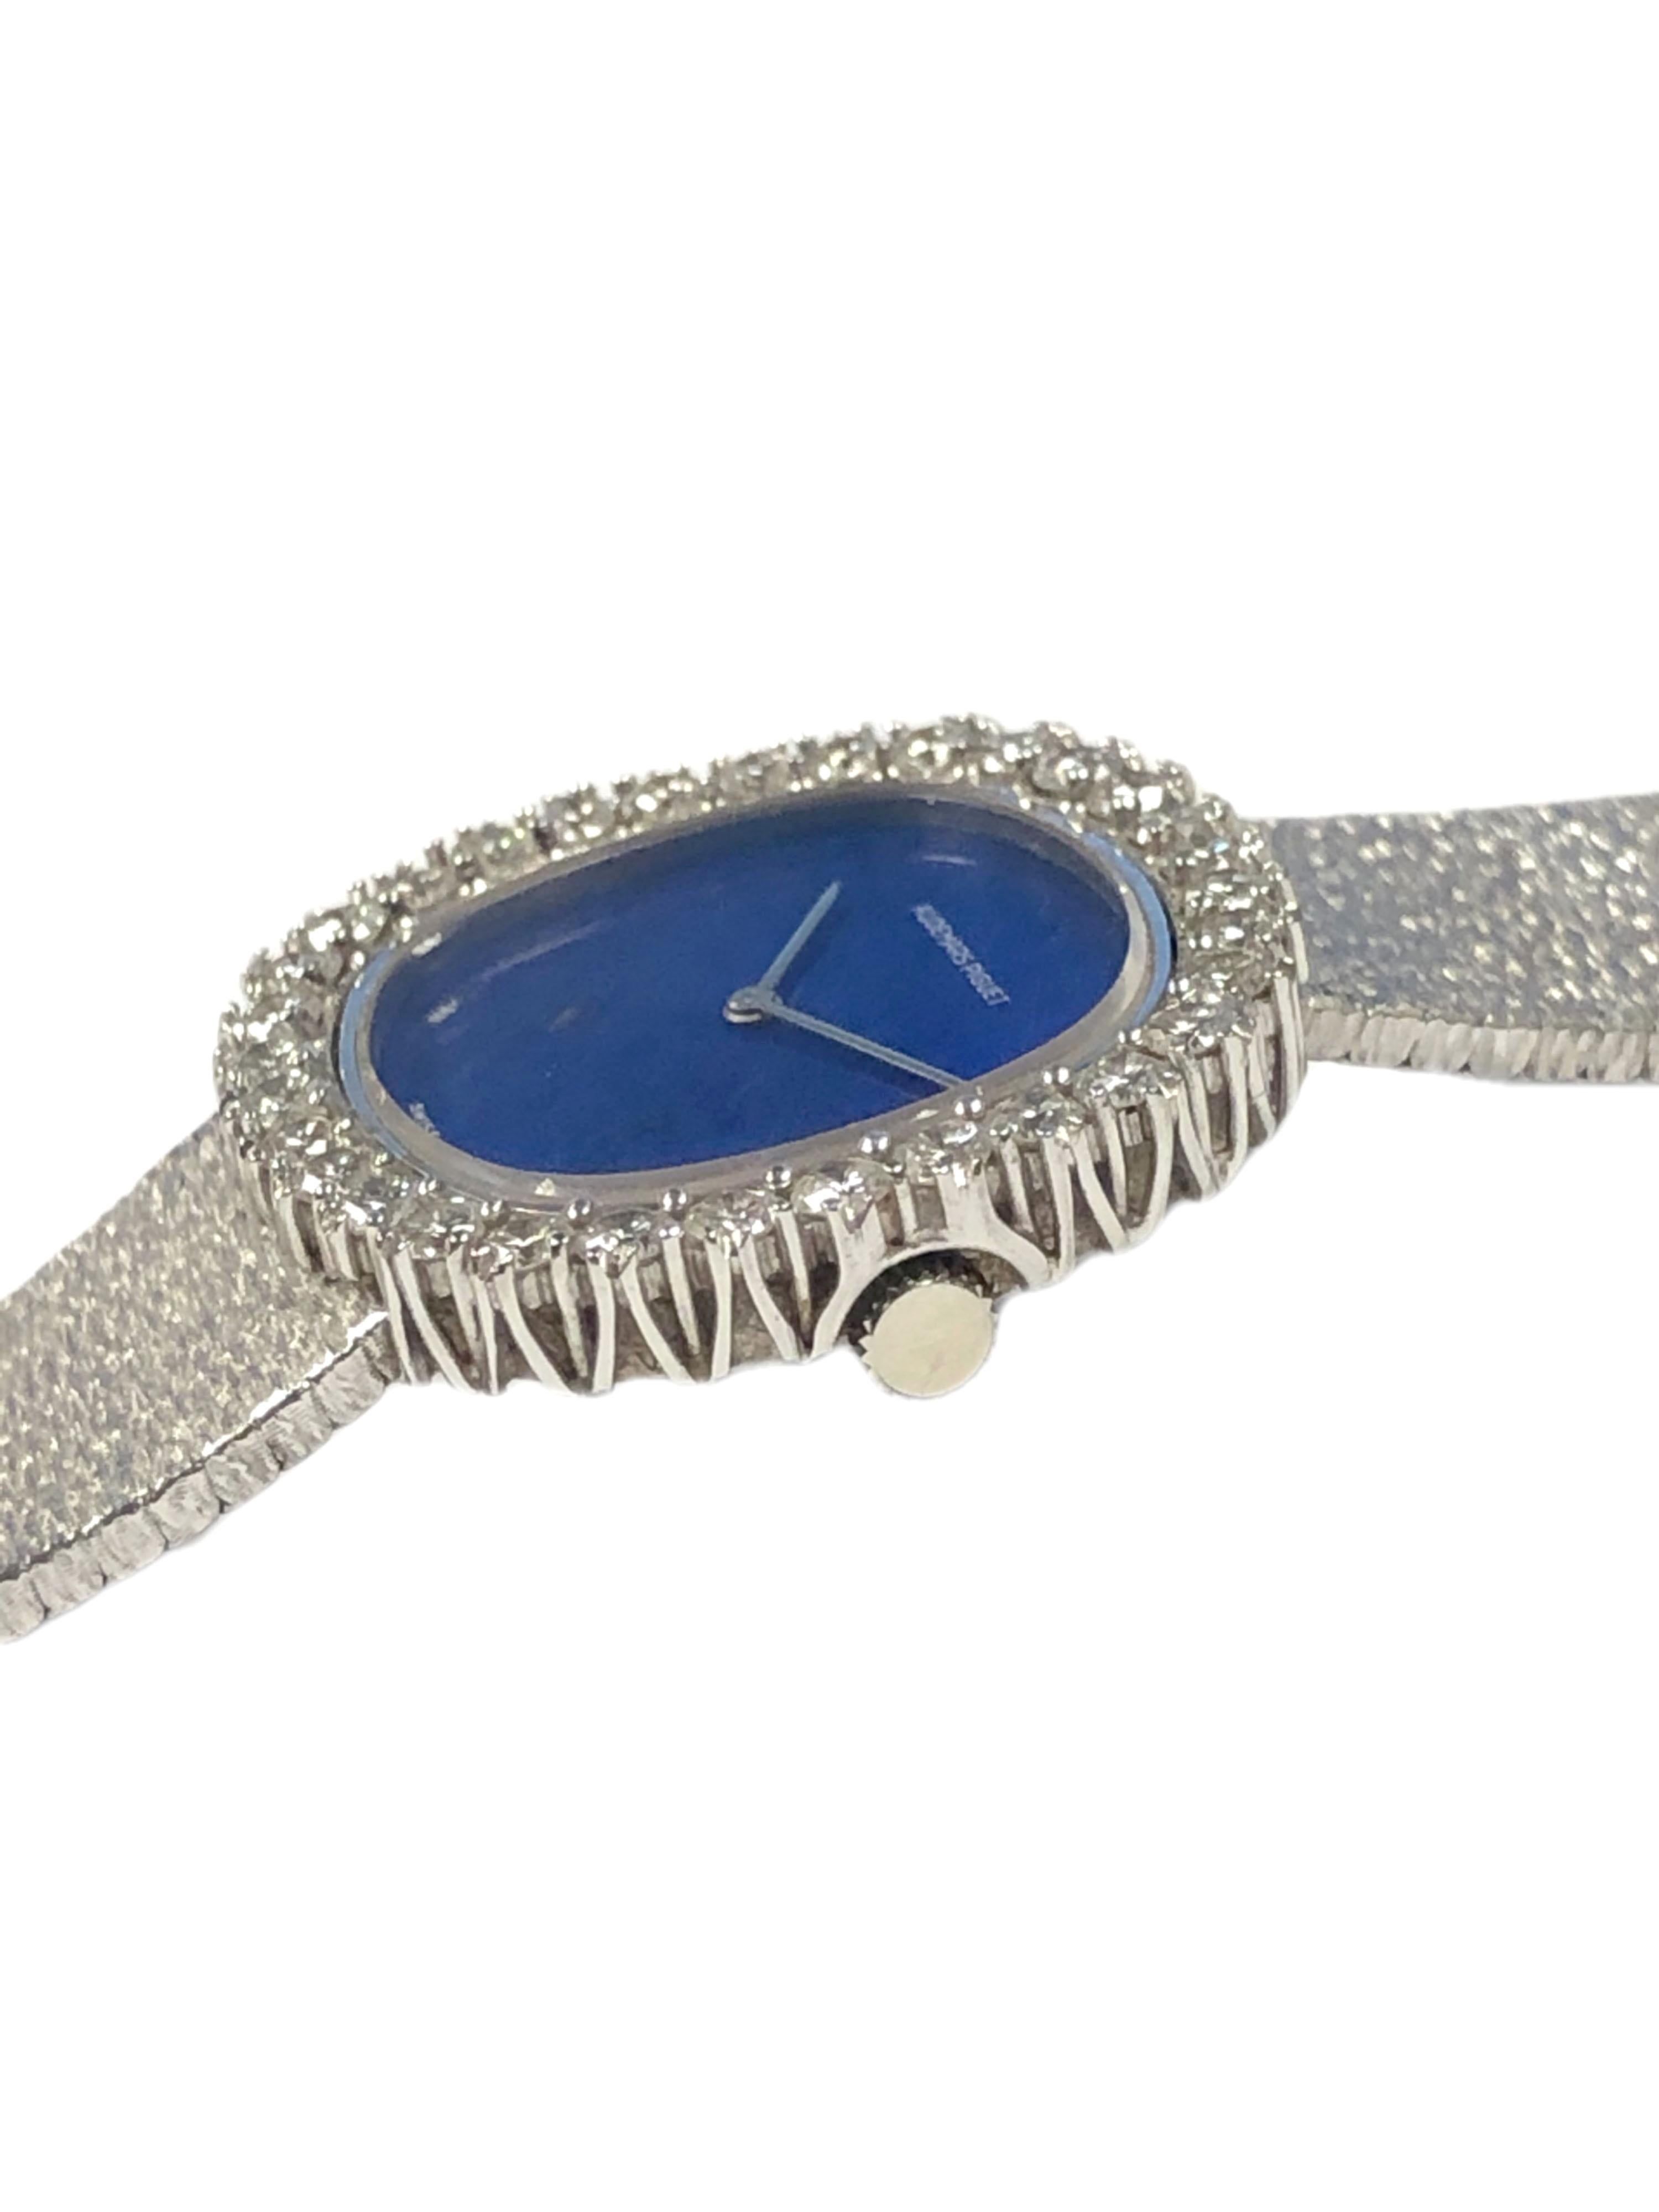 Circa 1980 Audemars Piguet Ladies Wrist Watch, 28 X 27 M.M. 18K White Gold 2 piece case with a Diamond set bezel, the stones are very fine White Round Brilliant cuts totaling 2.30 Carats. Lapis Lazulli Dial and White gold hands. 17 Jewel,